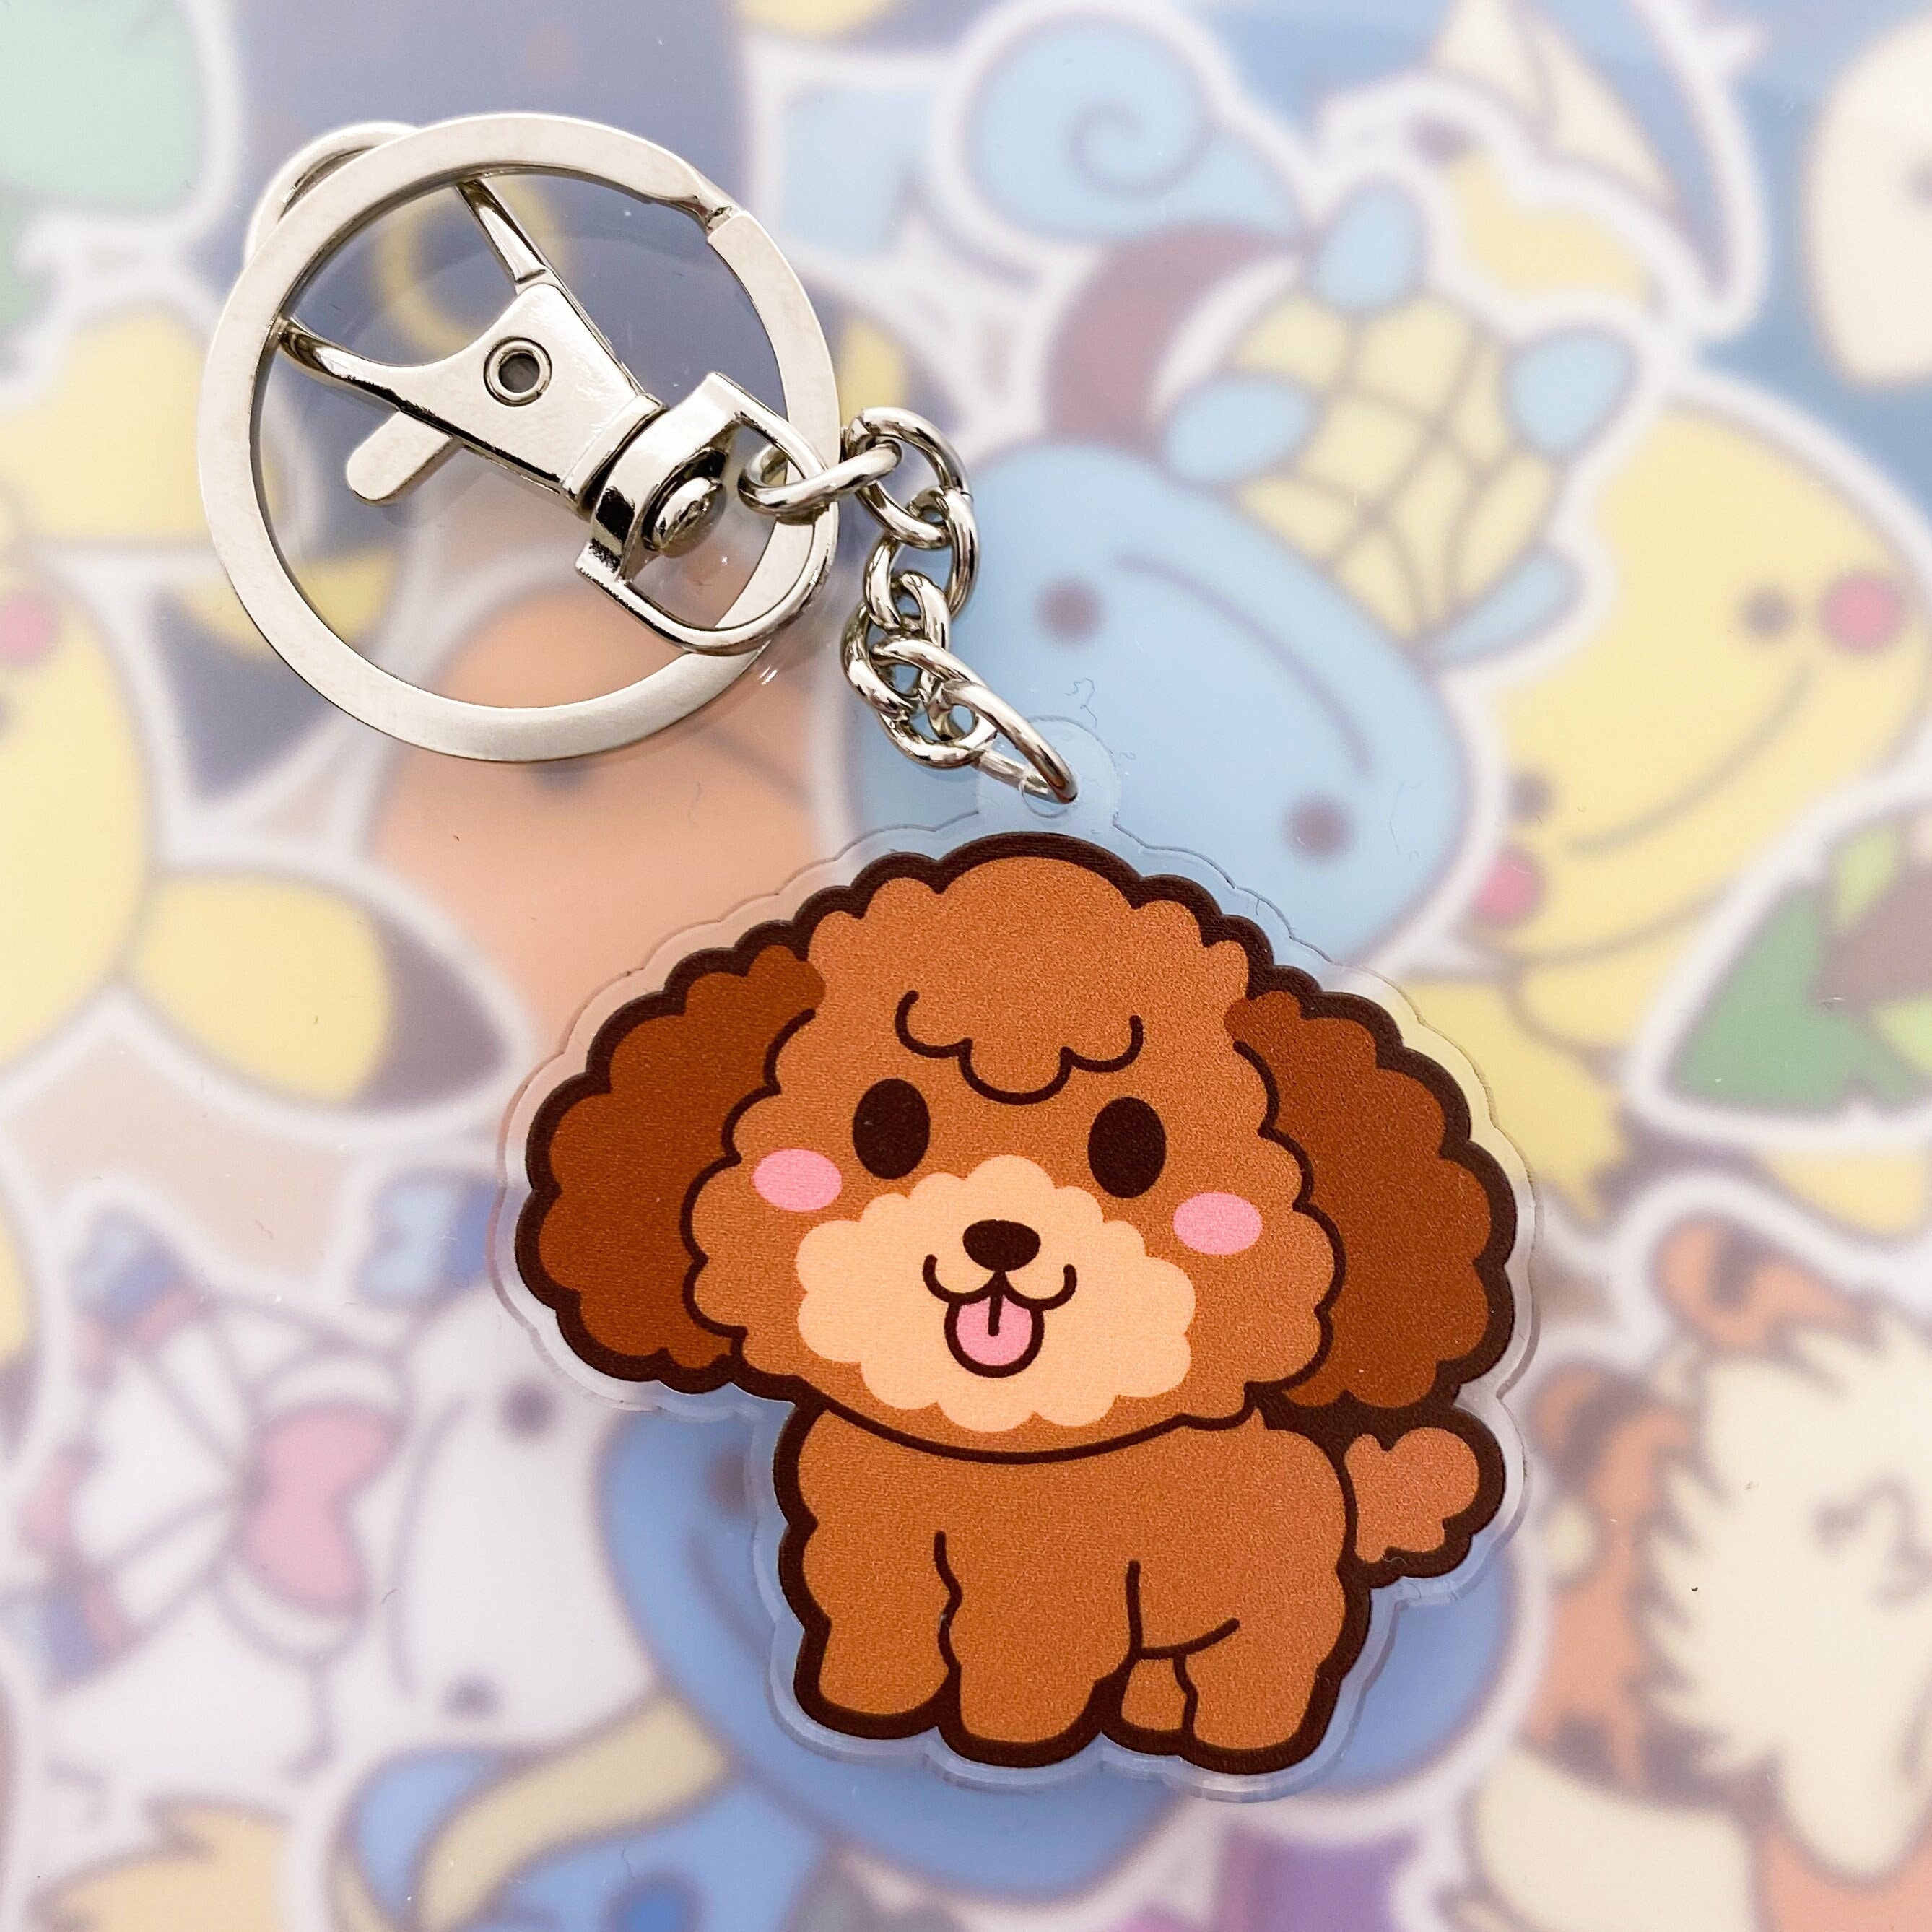  Toy Poodle Genuiine Leather Animal/Dog Bag Charm/Keychain  *VANCA* Handmade in Japan : Key Tags And Chains : Office Products